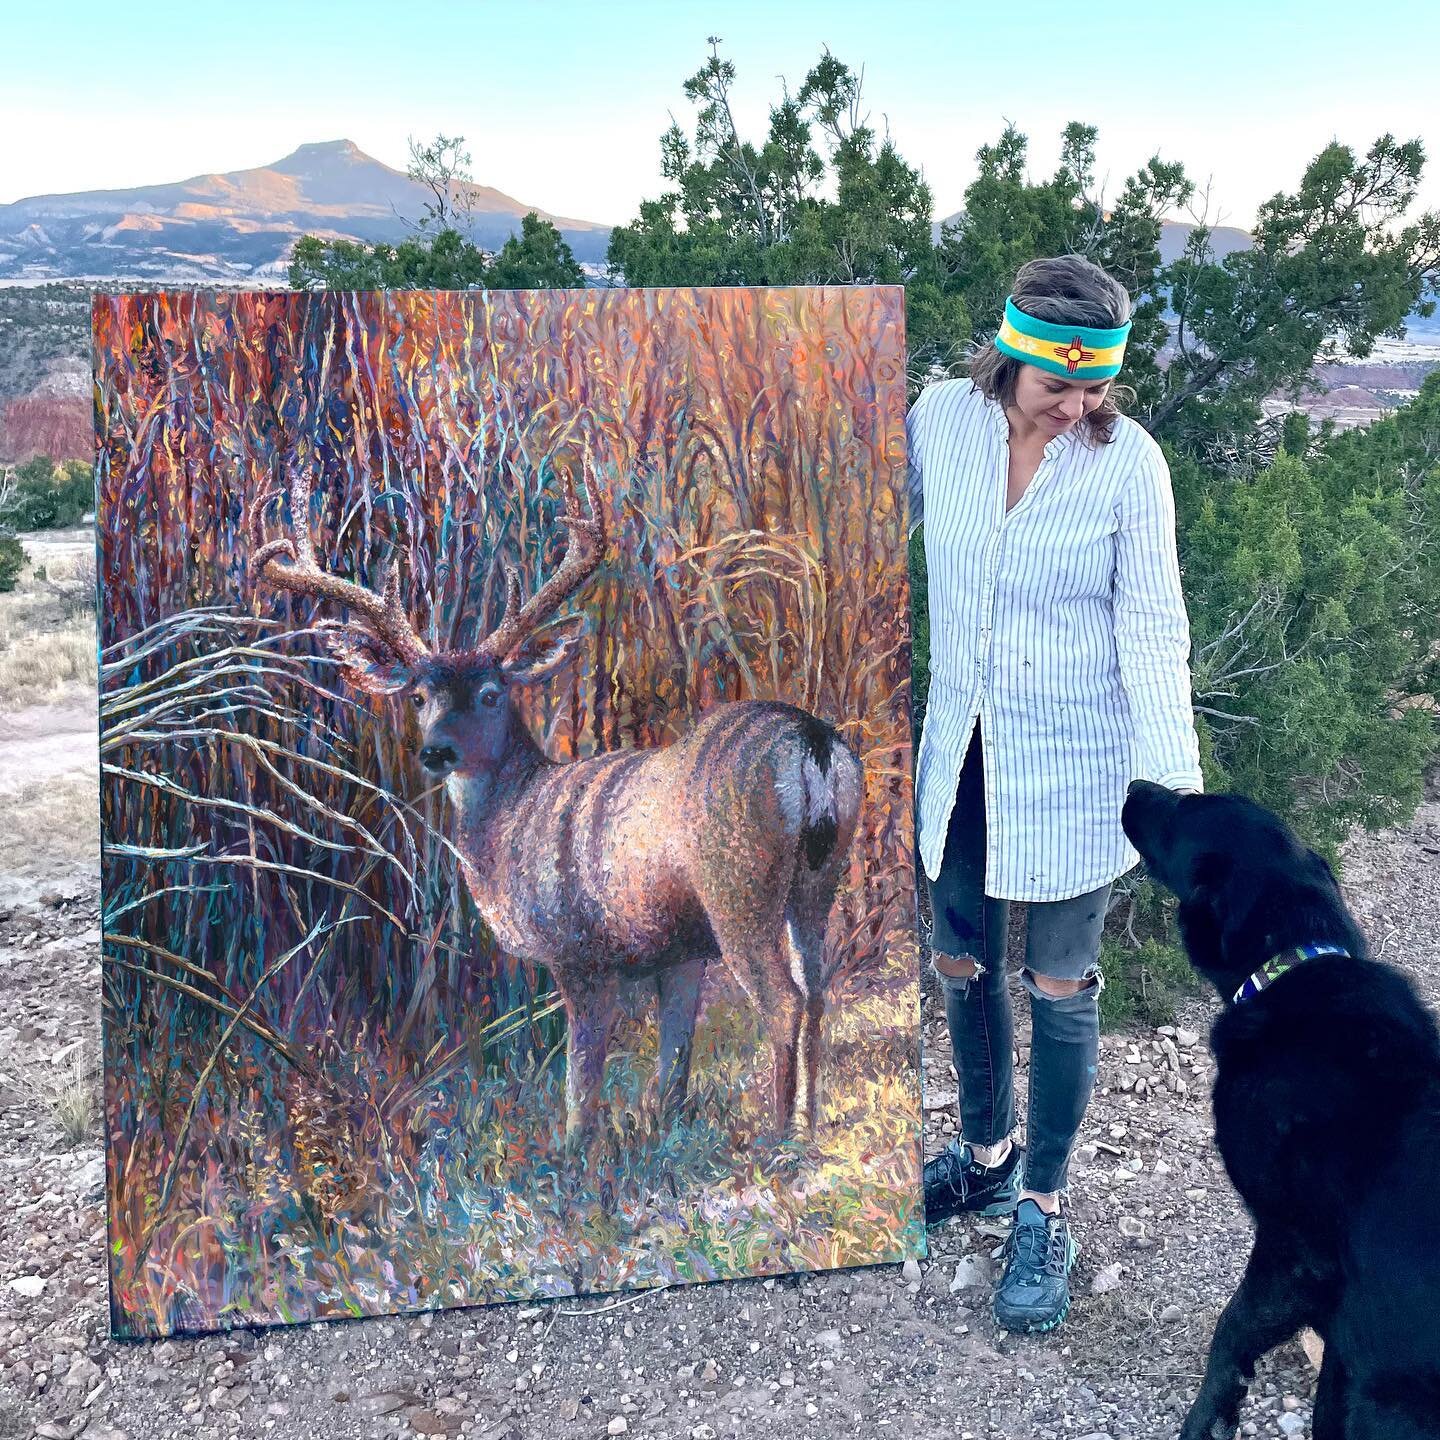 New! Original just sold. 60x48 inch 

Standing here with my wonderful dog Fernando and my new mule deer painting. 

Learn more about commissioning custom artwork at www.IrisScottFineArt.com/commissions

Special thanks to @adelmanfineart for bringing 